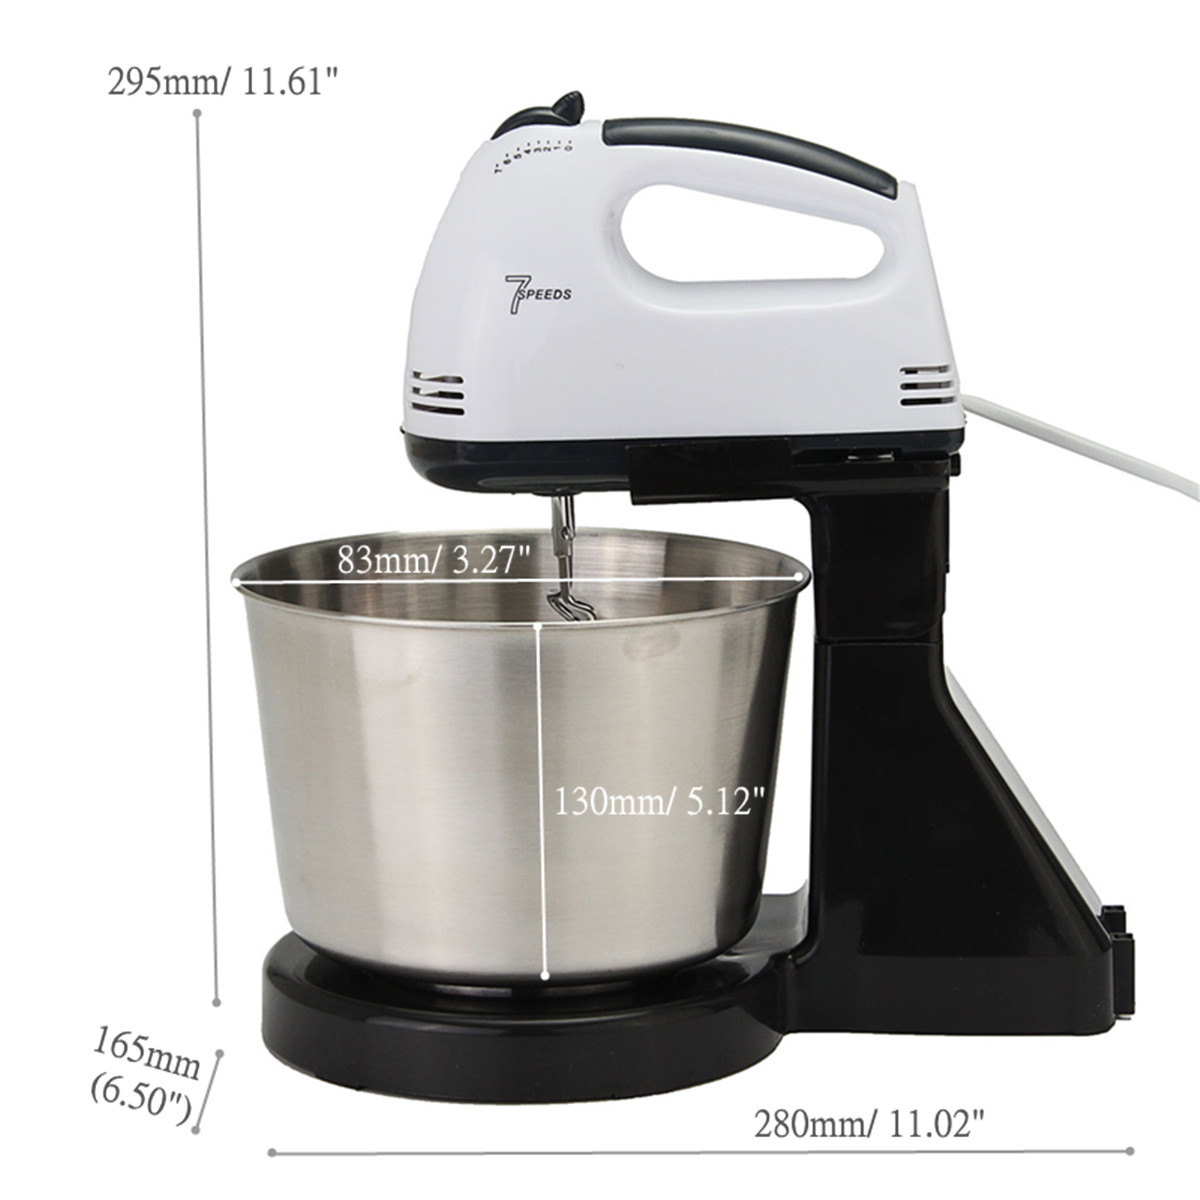 7 Speed Electric Egg Beater Dough Cakes Bread Egg Stand Mixer + Hand Blender + Bowl Food Mixer Kitchen Accessories Egg Tools 76